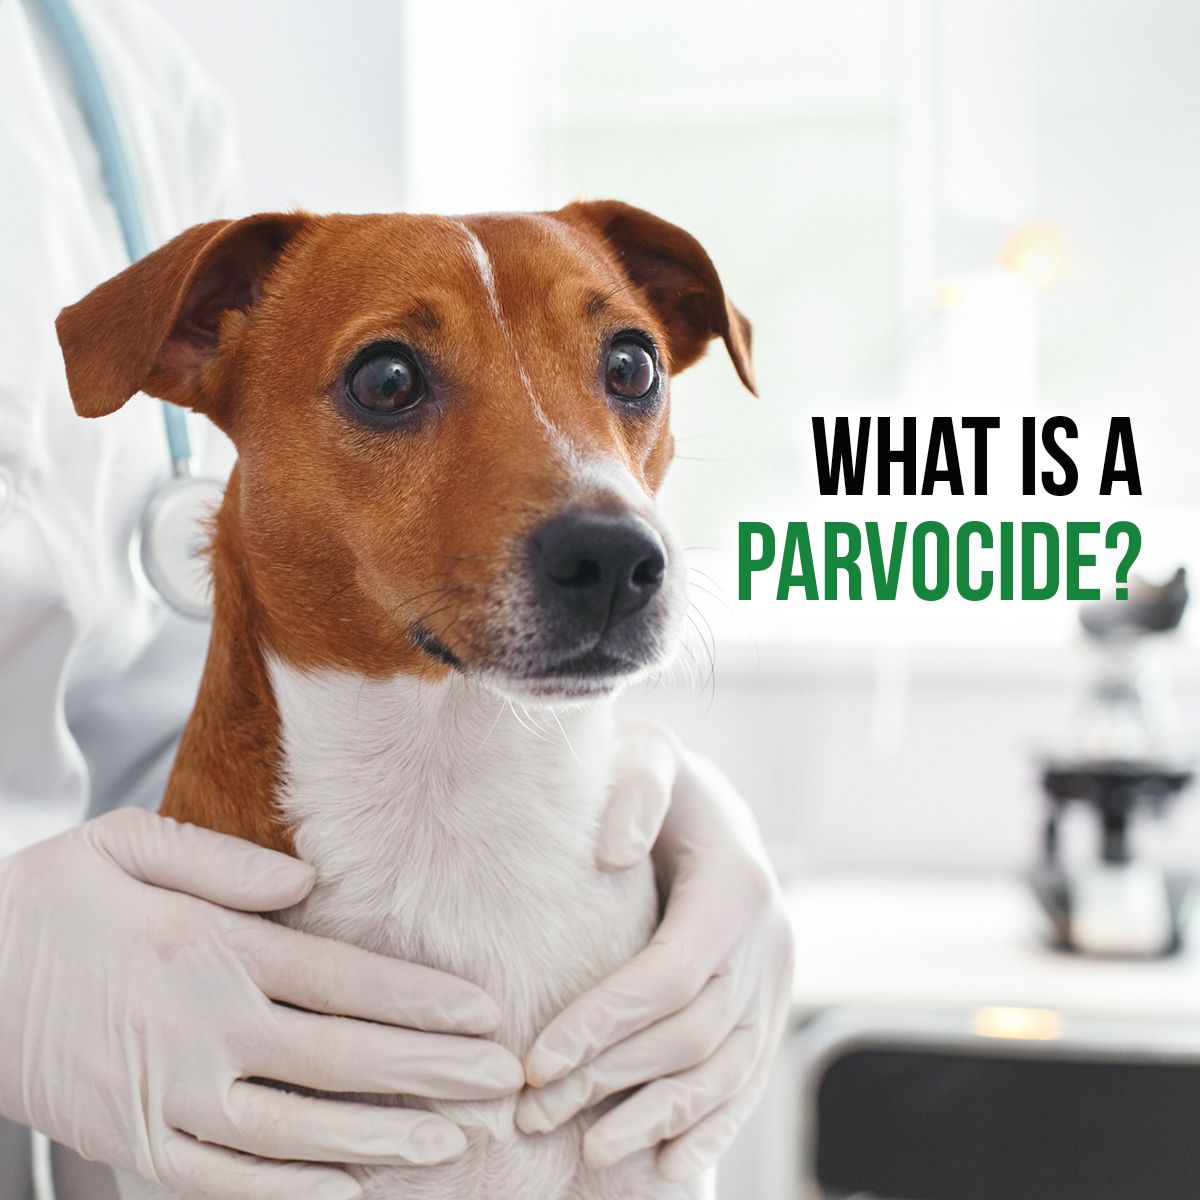 What Is a Parvocide?